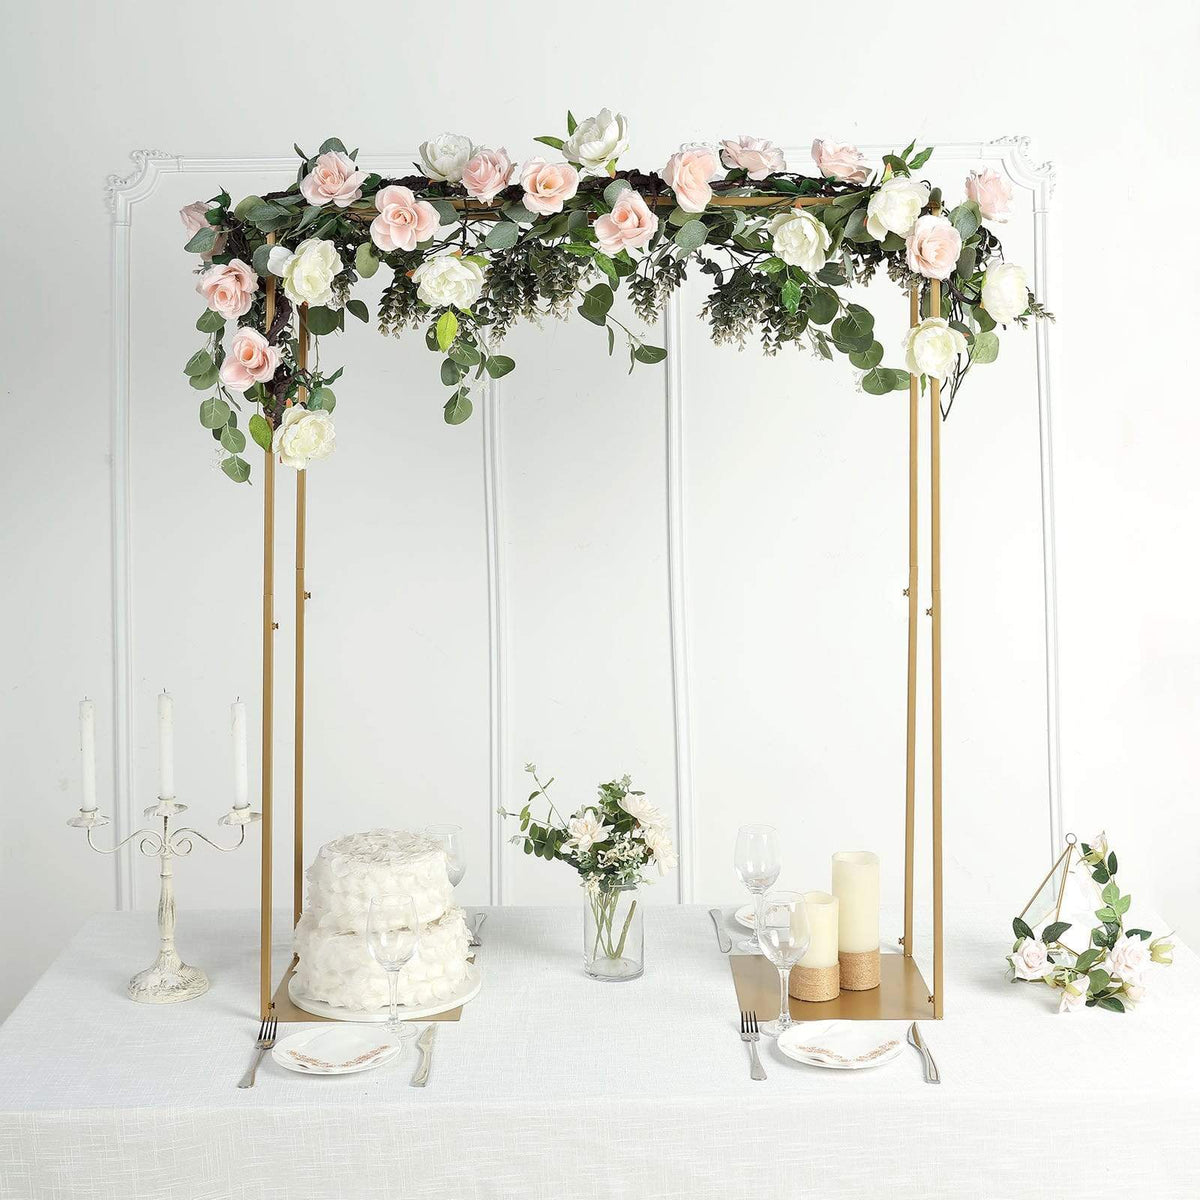 Adjustable Over The Table Rod Stand,Metal Flower Balloon Table Arch Stand,  Sturdy Balloon Backdrop Stand Suitable for Birthday